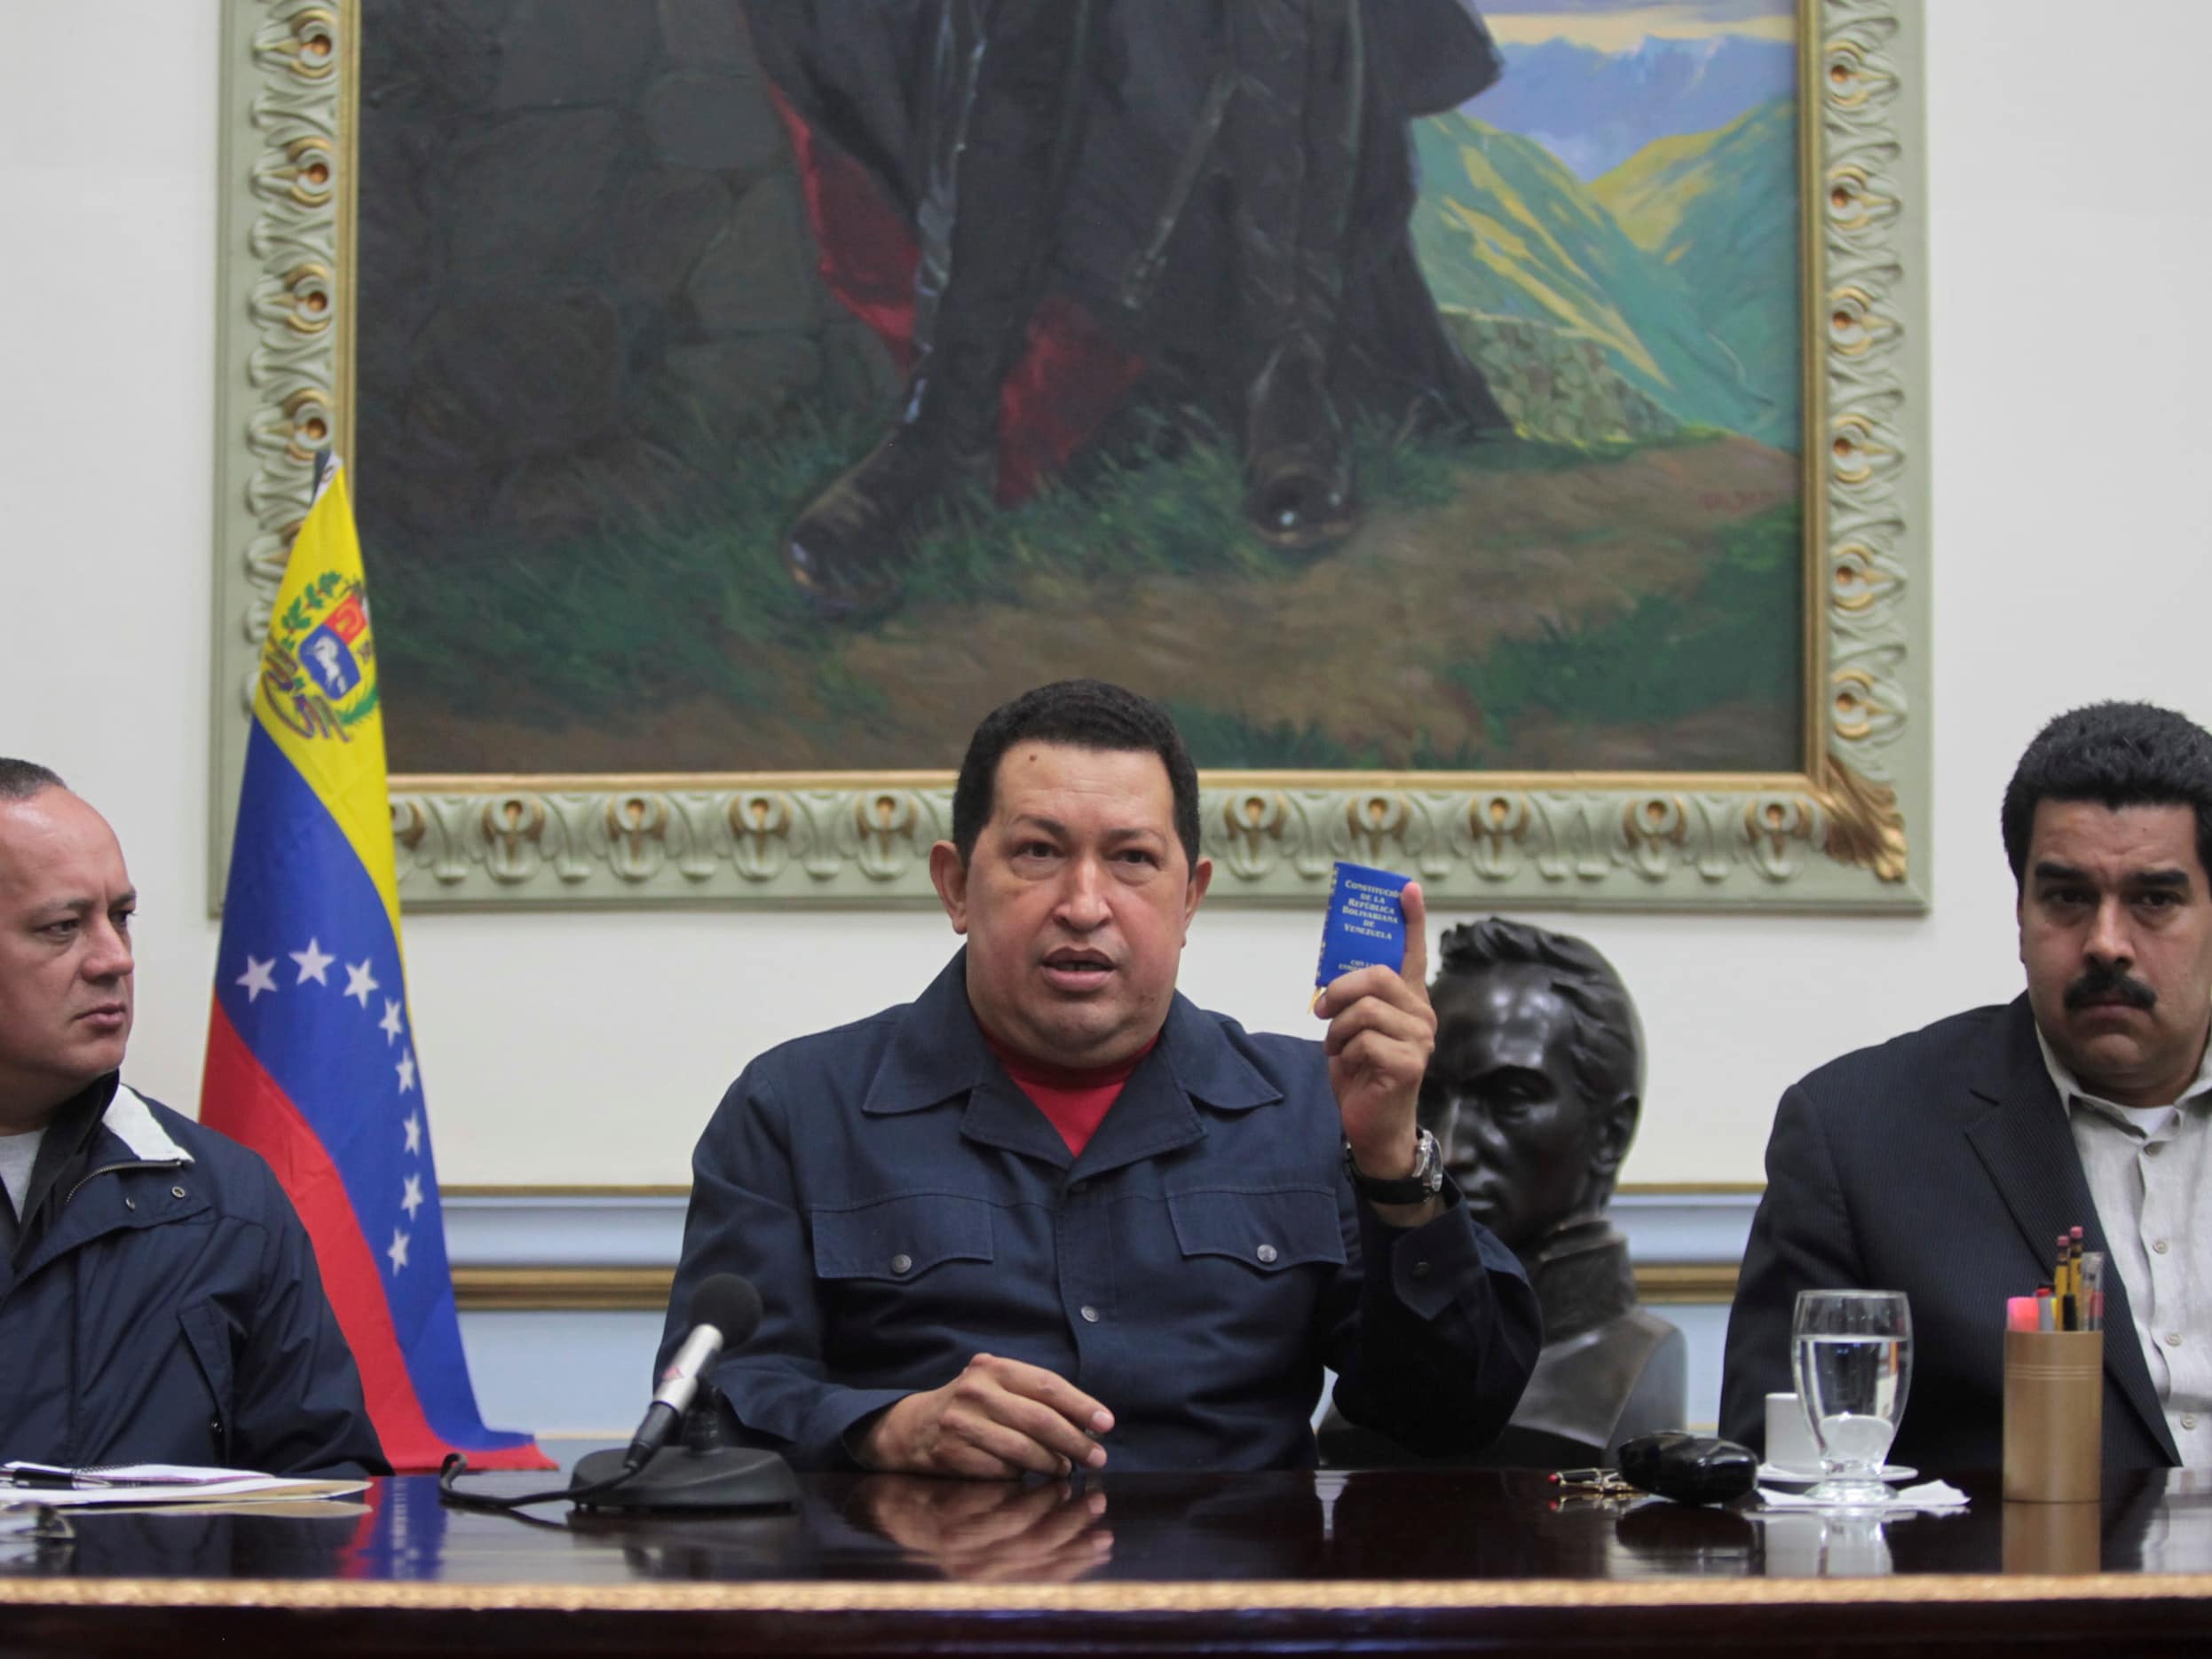 Venezuelan President Hugo Chávez speaks next to Vice President Nicolas Maduro (R) and National assembly president Diosdado Cabello (L) during a national broadcast at Miraflores Palace in Caracas December 8, 2012, REUTERS/Miraflores Palace/Handout